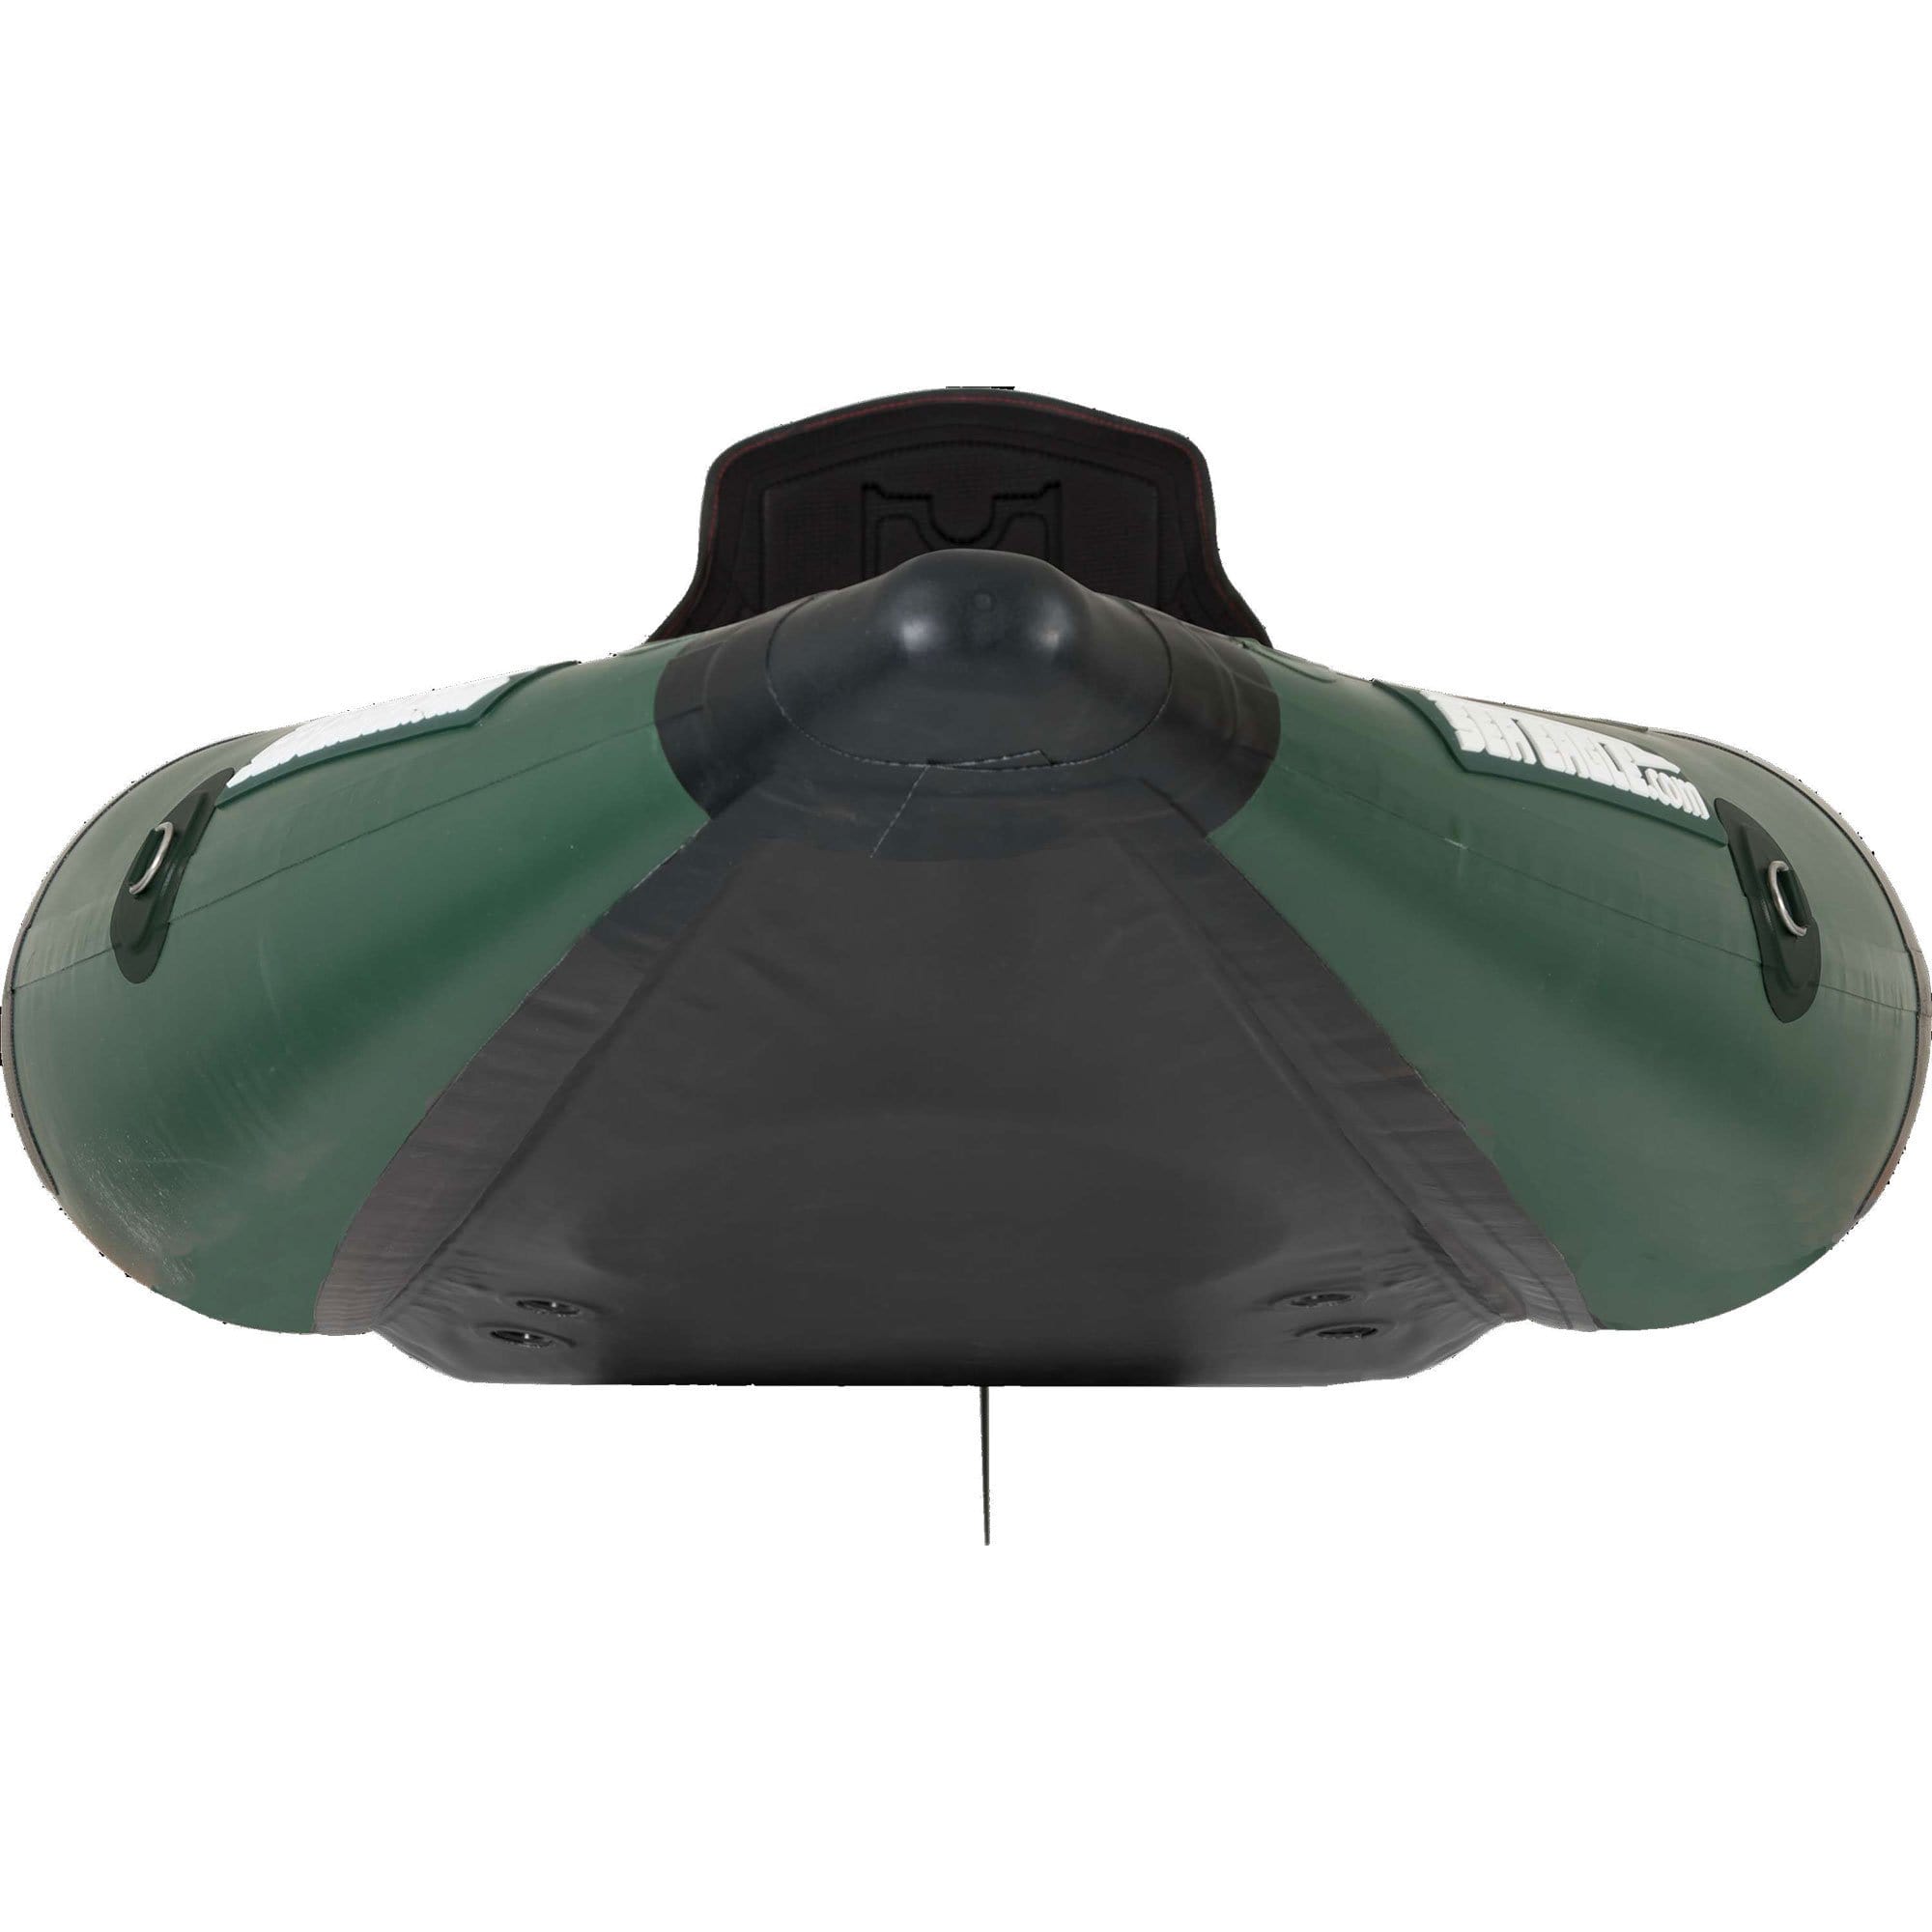 SeaEagle Inflatable Kayak Sea Eagle - 350FX One Person 11'6" Green Fishing Explorer Inflatable Fishing Boat Swivel Seat Fishing Rig Package ( 350FXK_FR )